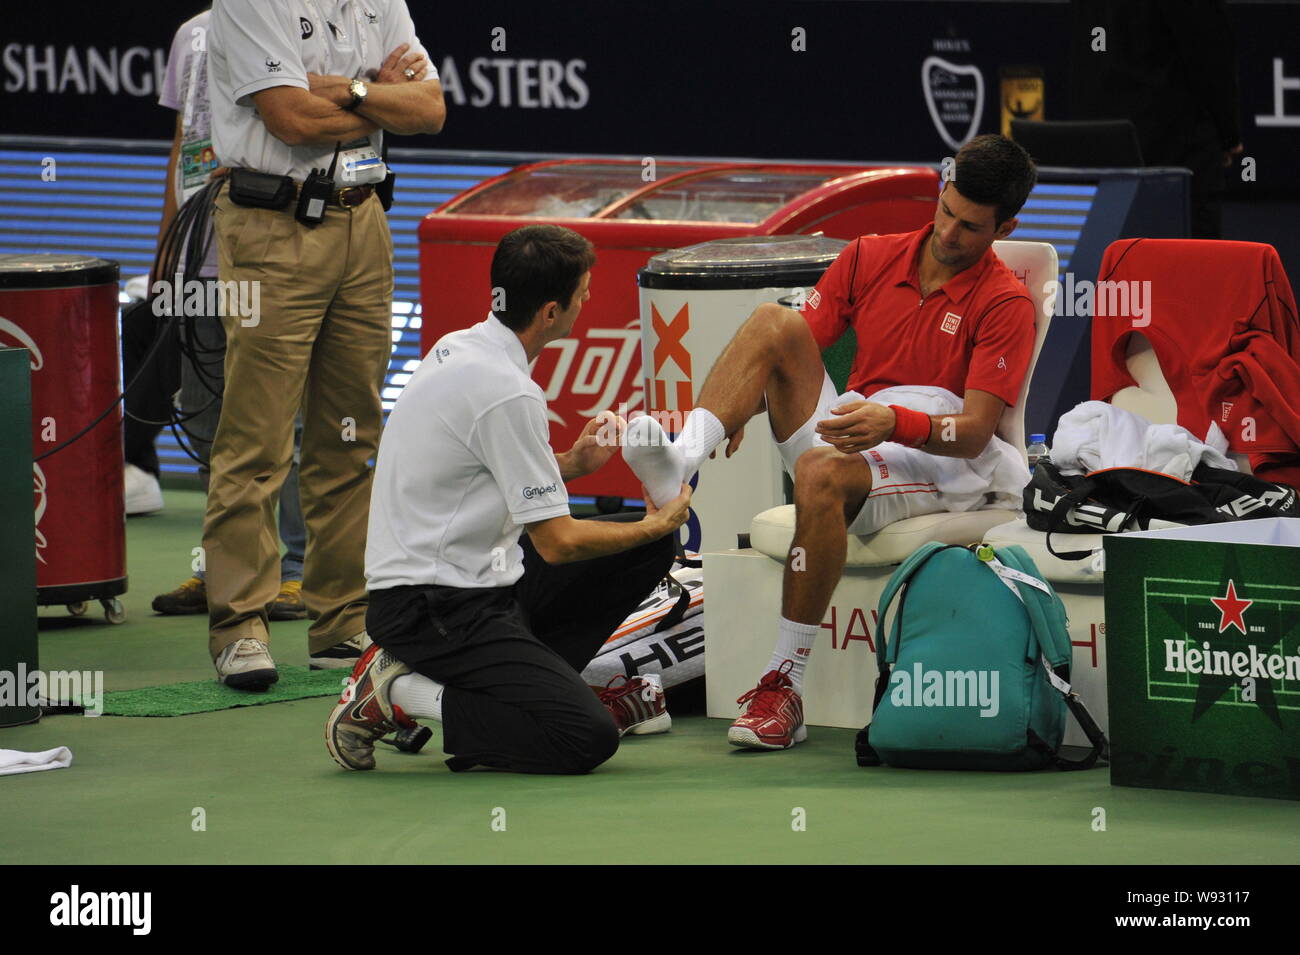 Serbias Novak Djokovic receives medical attention on his foot during a match against Spains Marcel Granollers for the Shanghai Masters tennis tourname Stock Photo